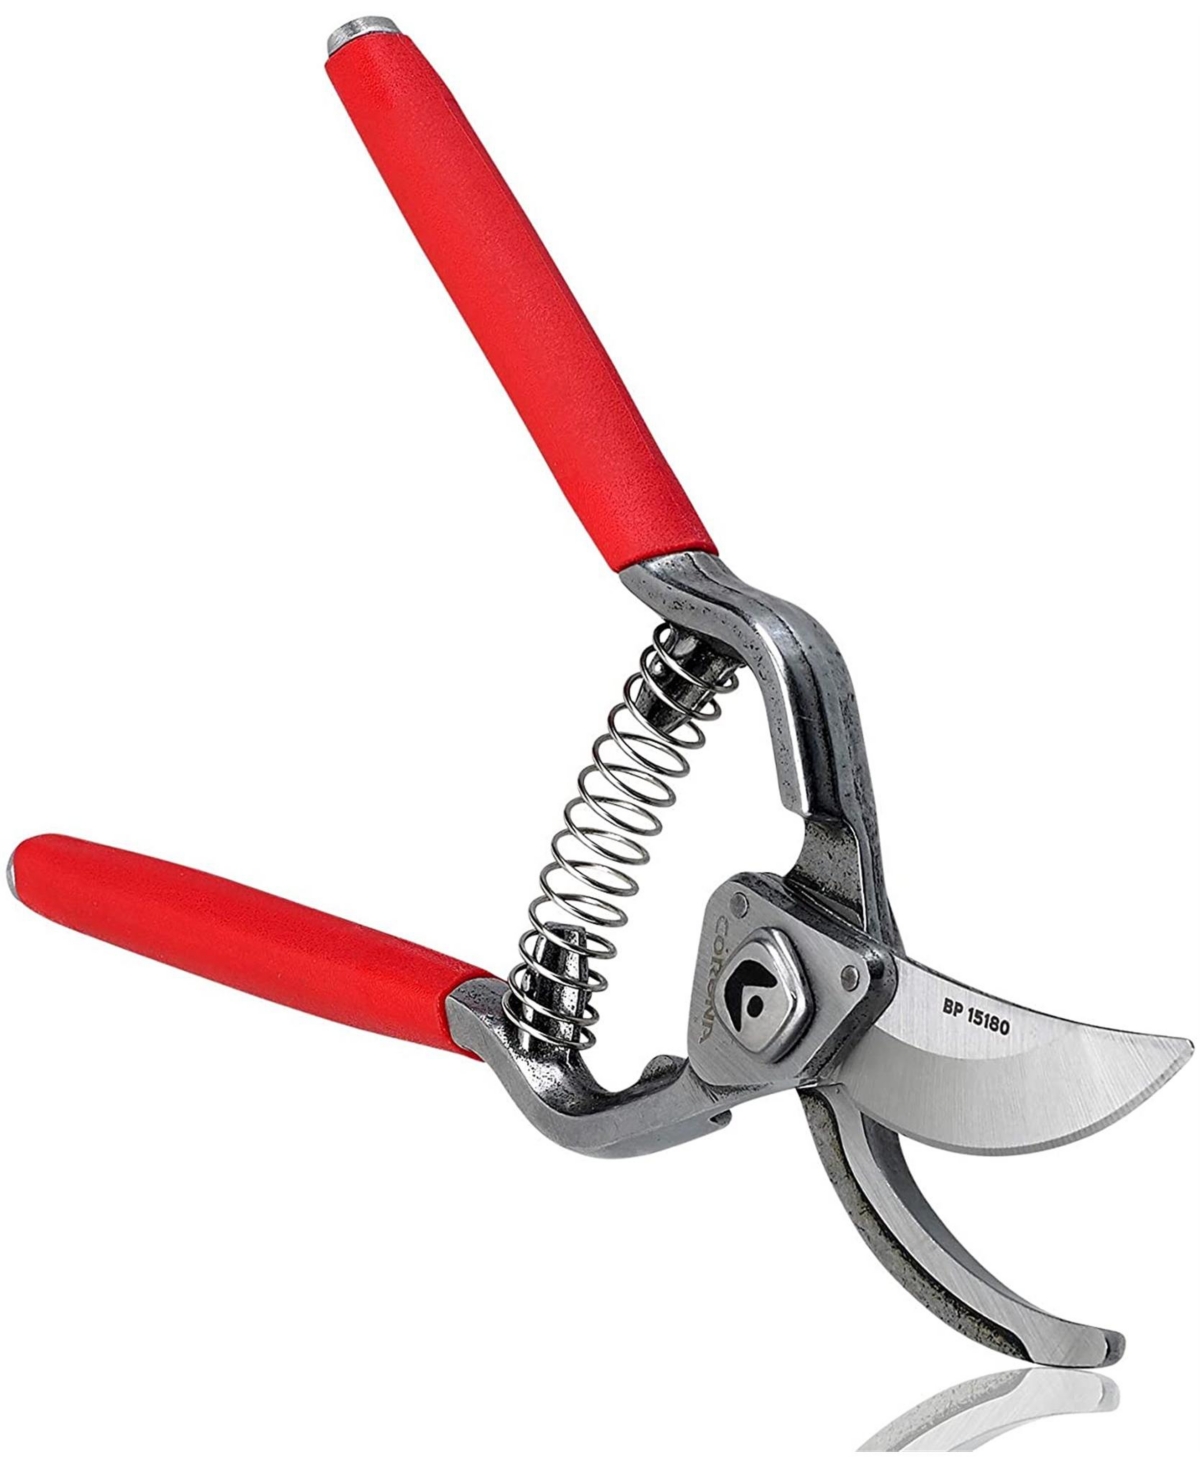 Clipper Forged Steel Classic-cut Bypass Pruner - Multi